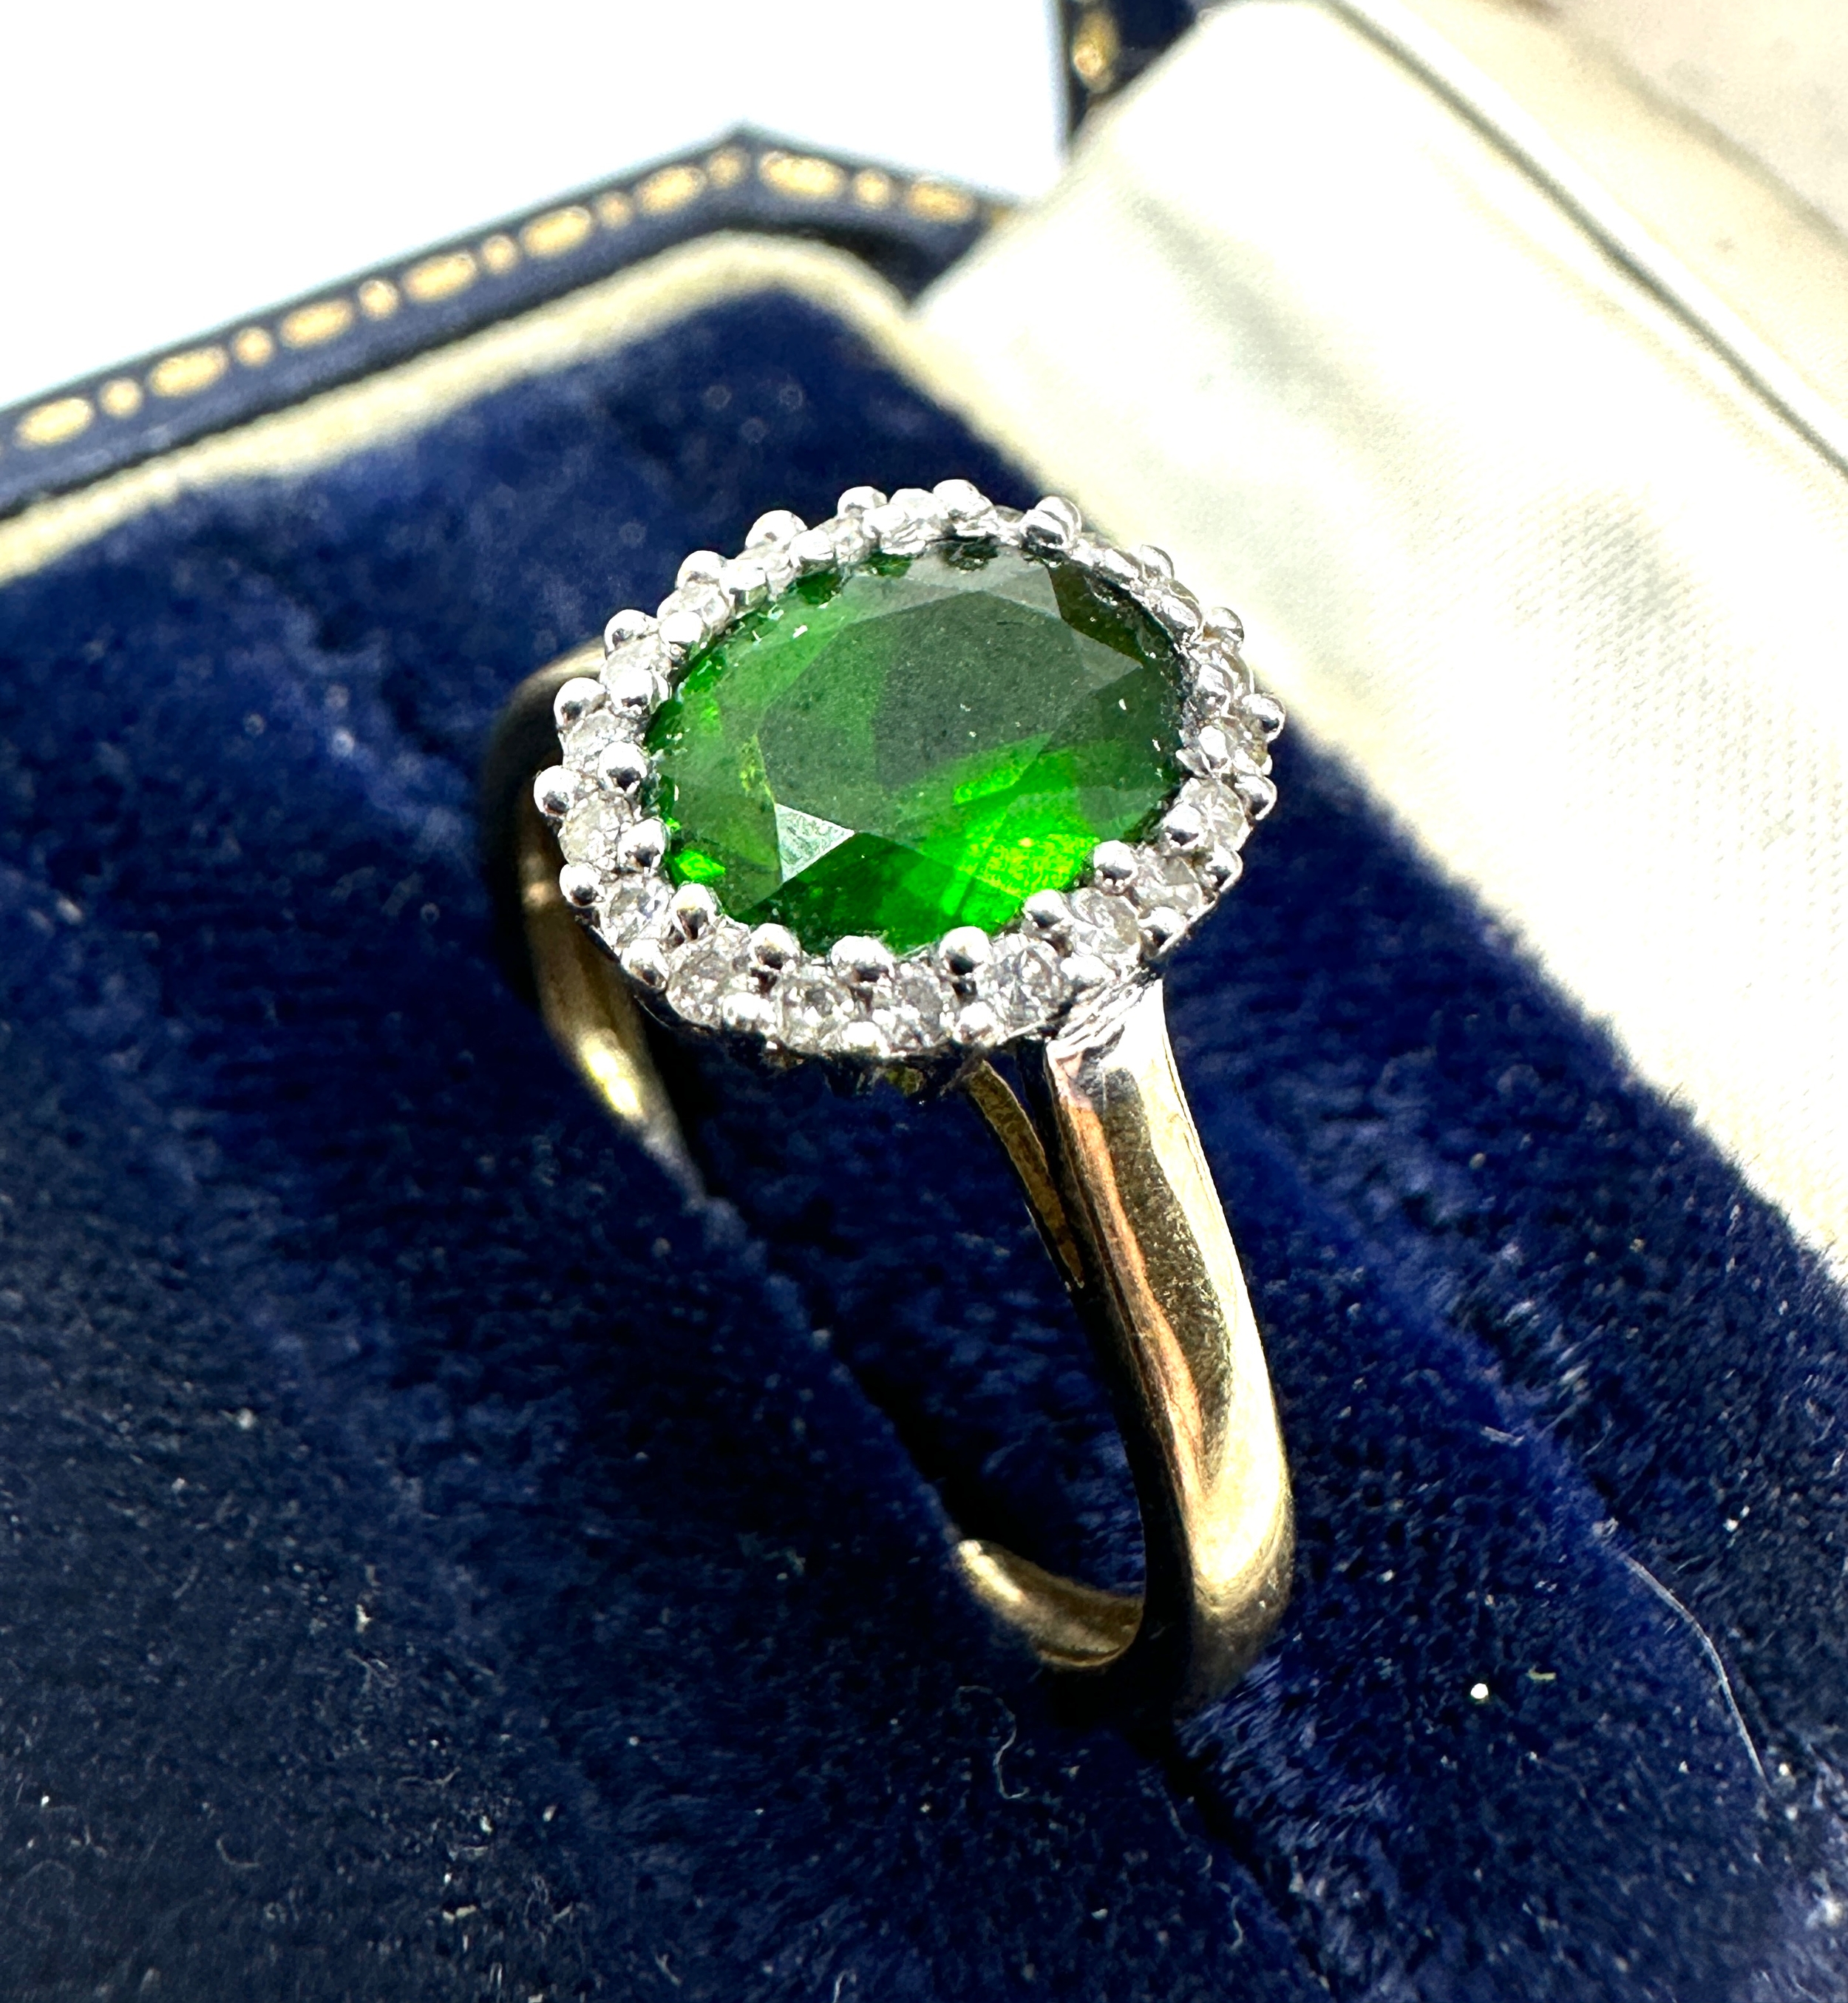 9ct gold diopside & diamond ring weight 2.2g - Image 3 of 4